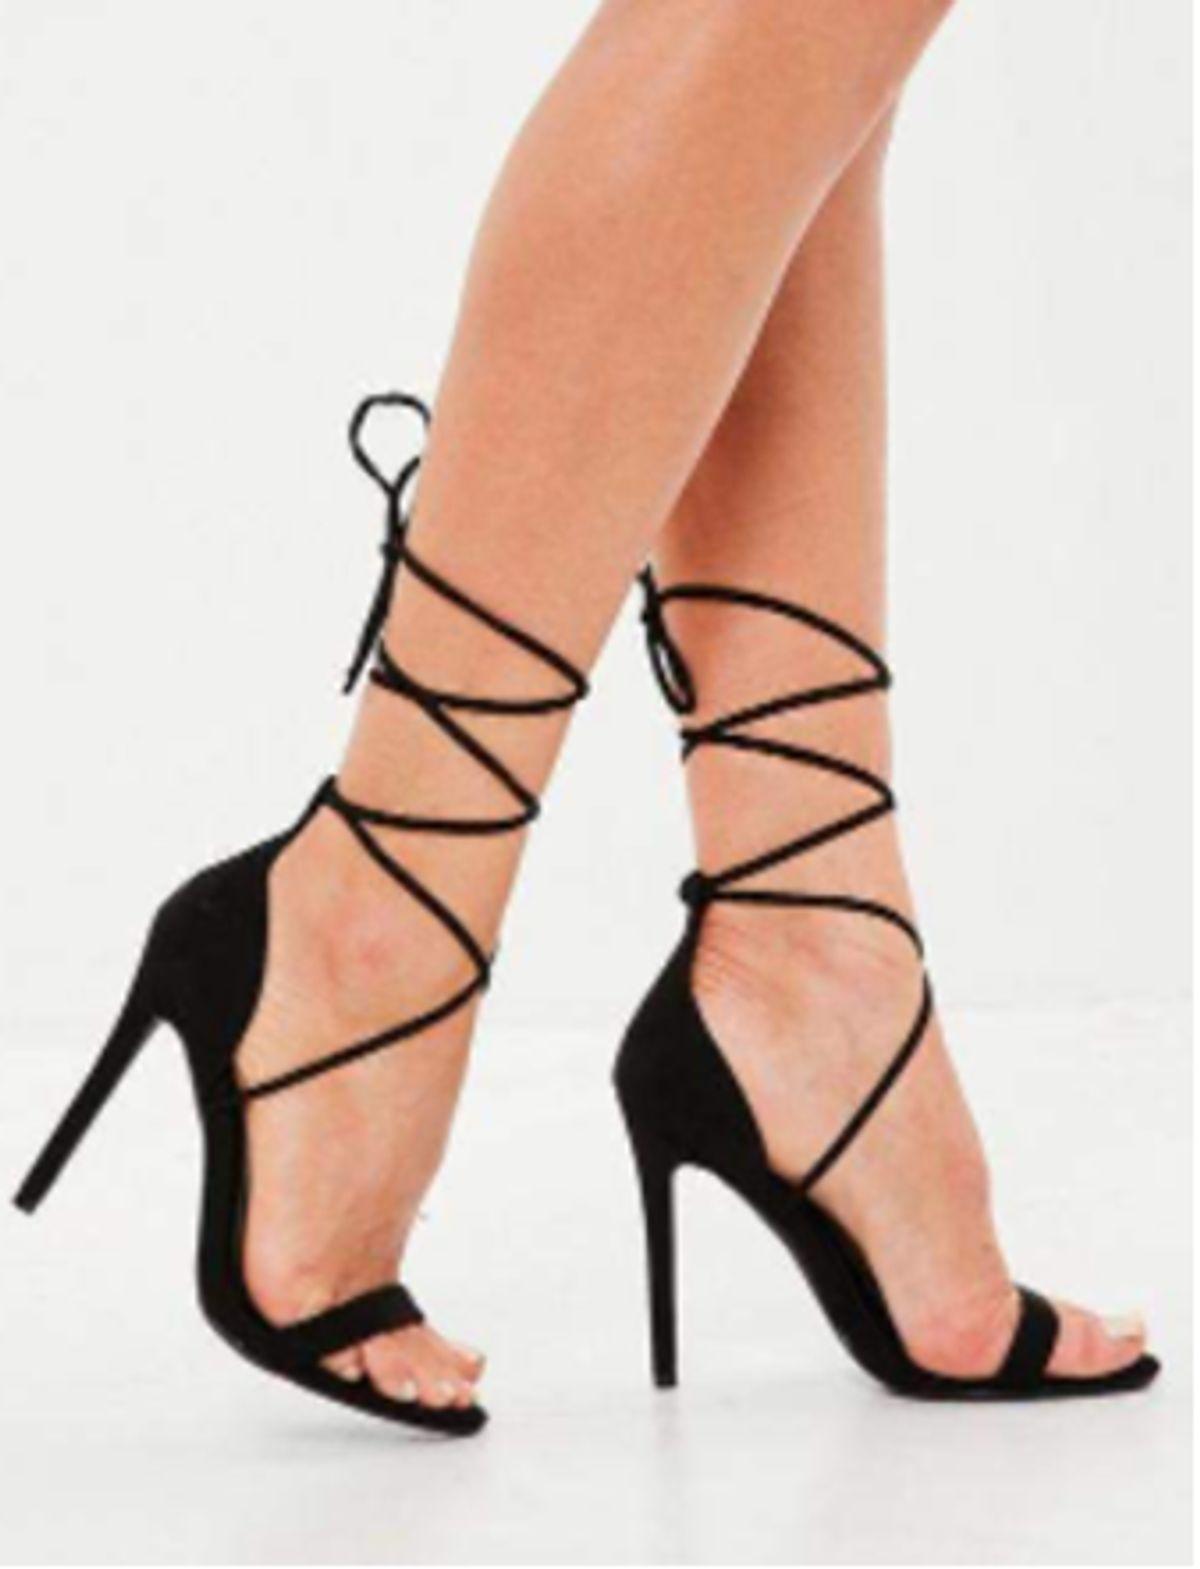 lace-up heels